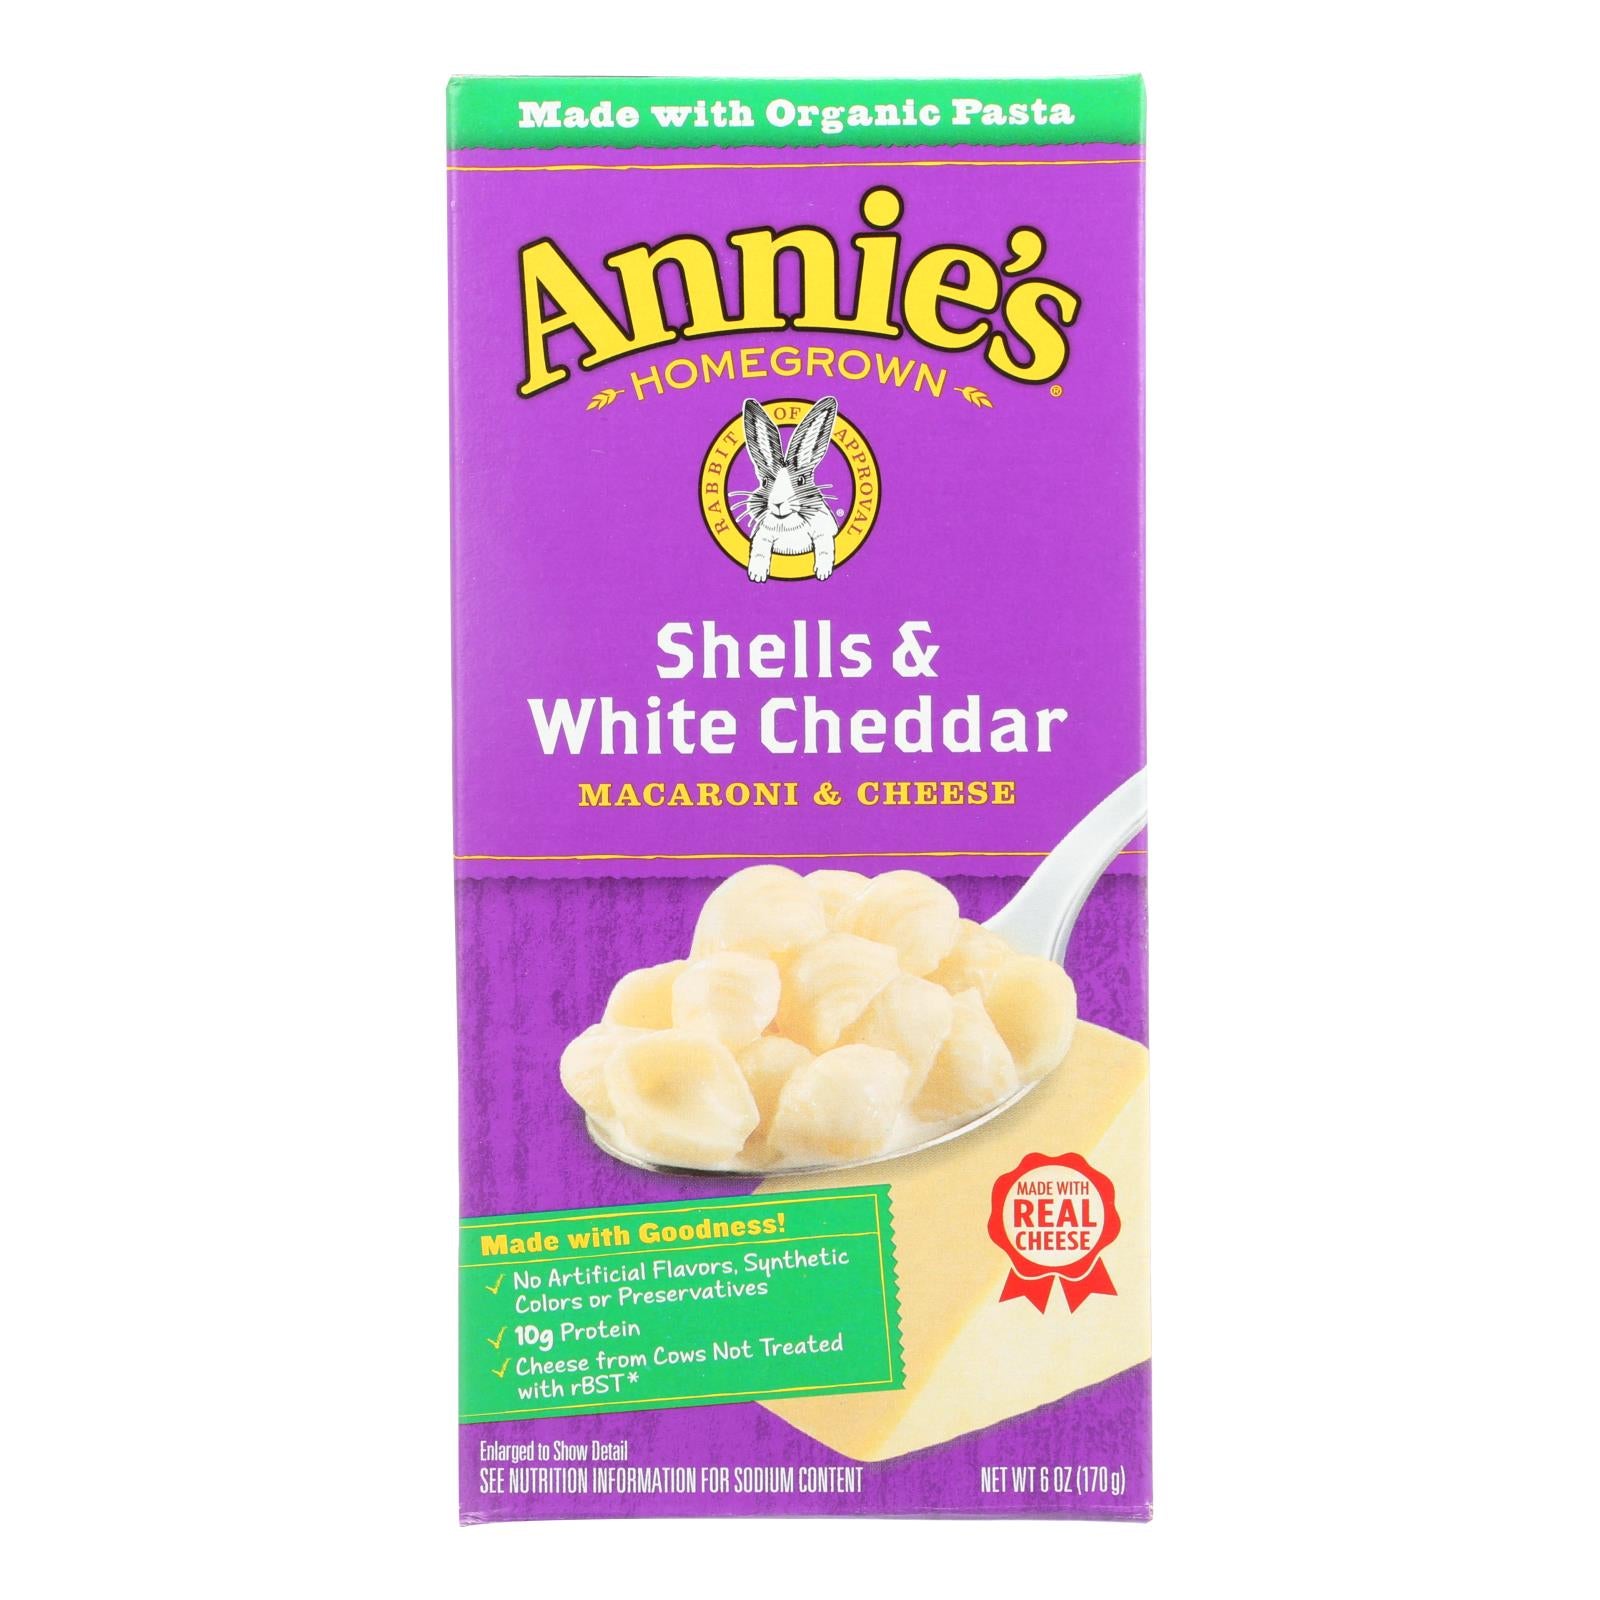 Annie'S Homegrown, Annies Homegrown Macaroni and Cheese - Shells and White Cheddar - 6 oz - case of 12 (Pack of 12)